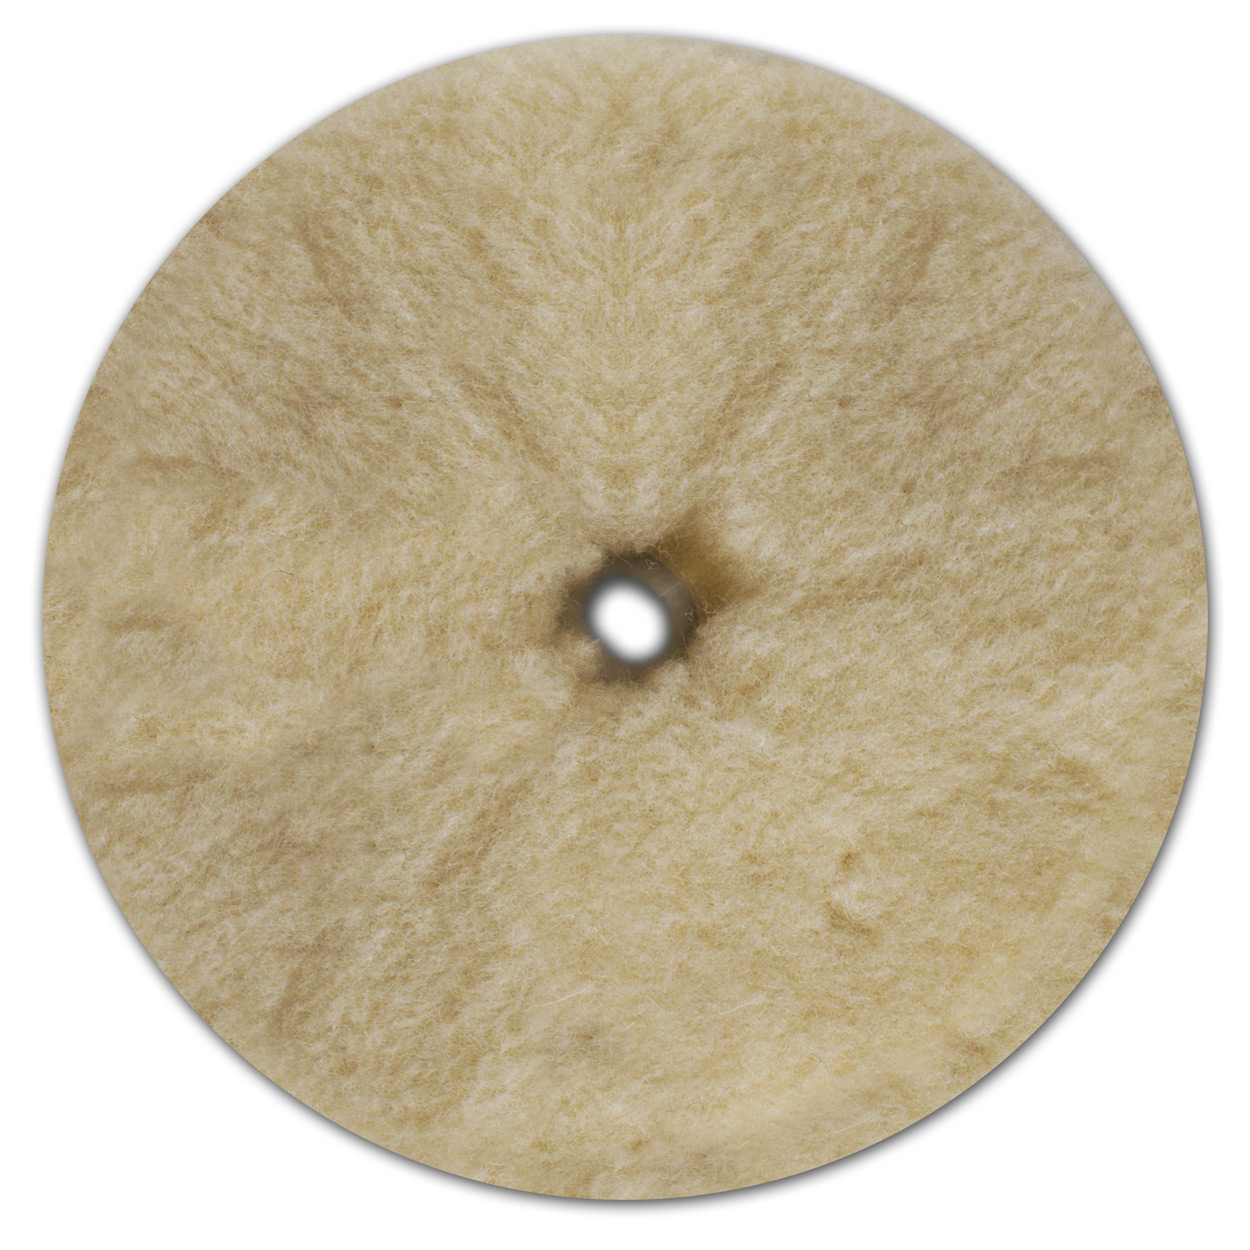 Prewashed Lambswool Buffing Pad – 6.5in